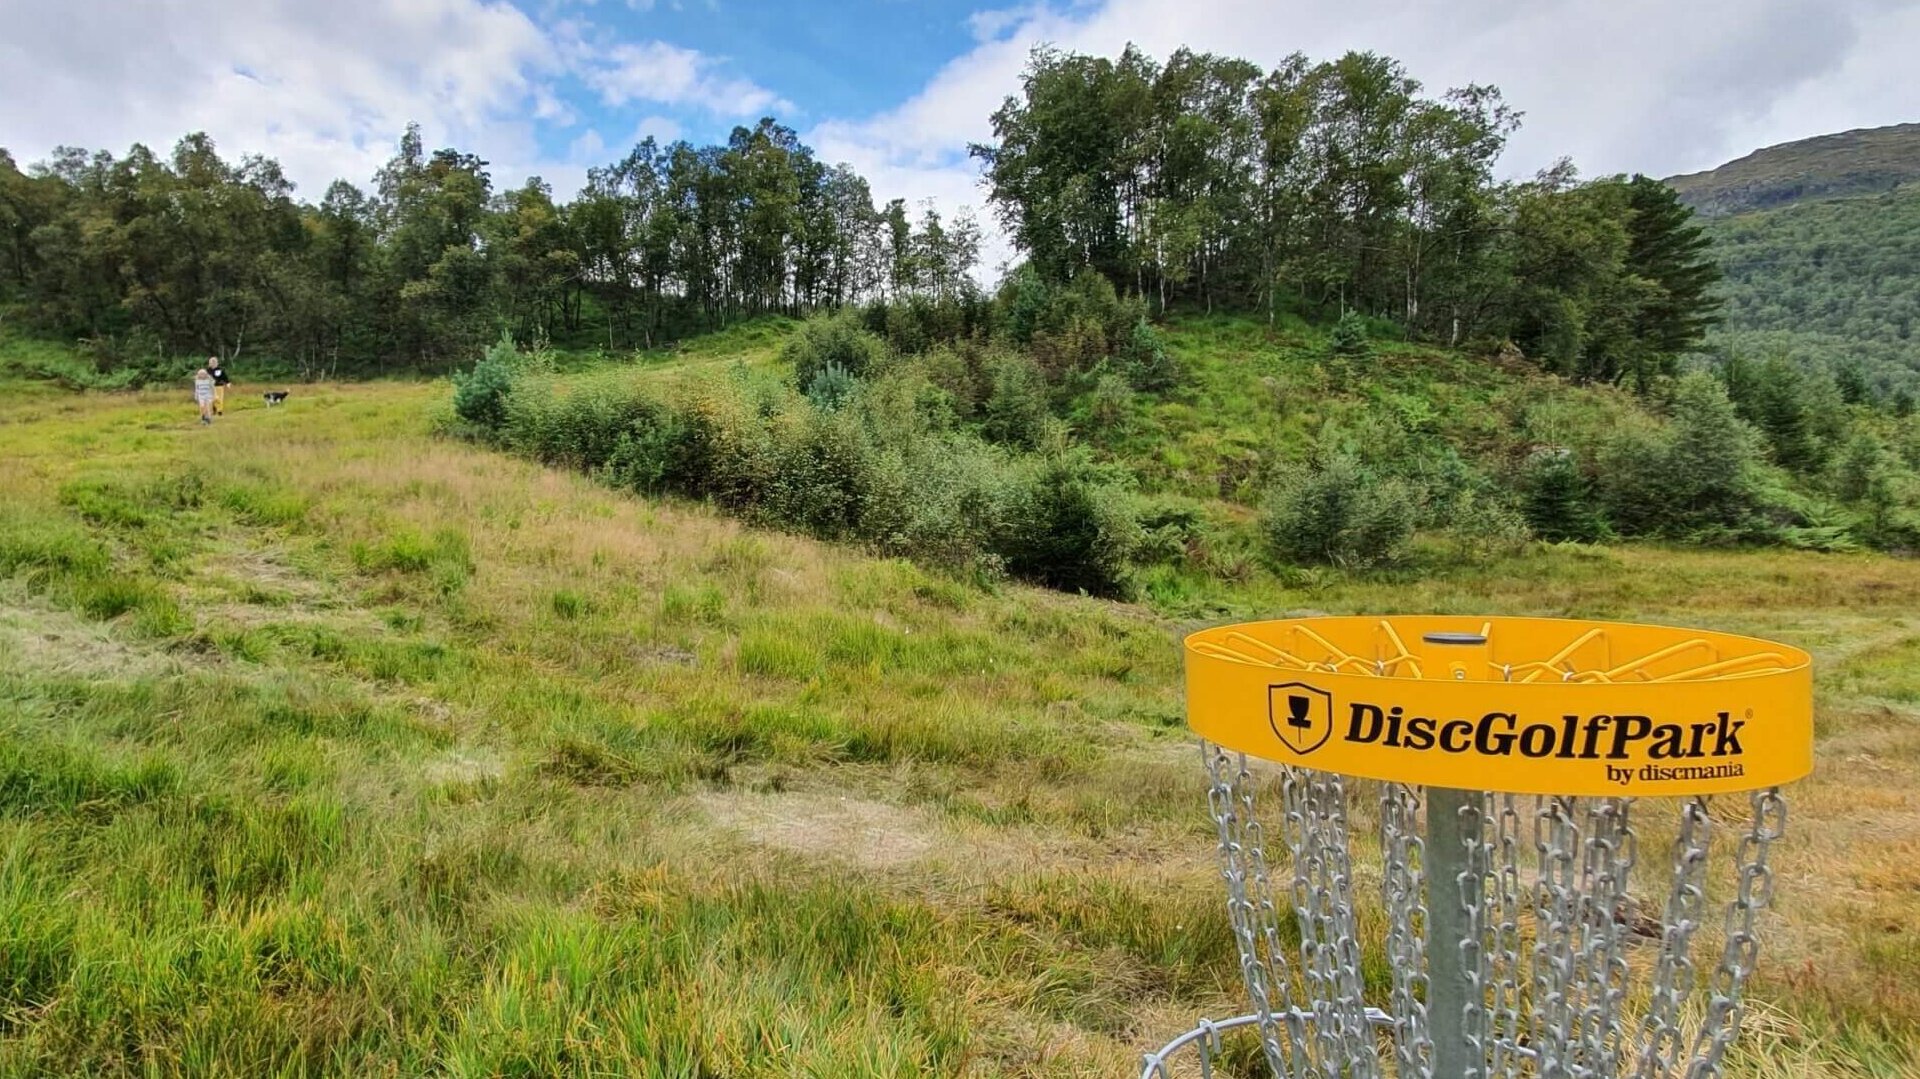 Disk golf or frisbee golf course in Sauda, Norway.